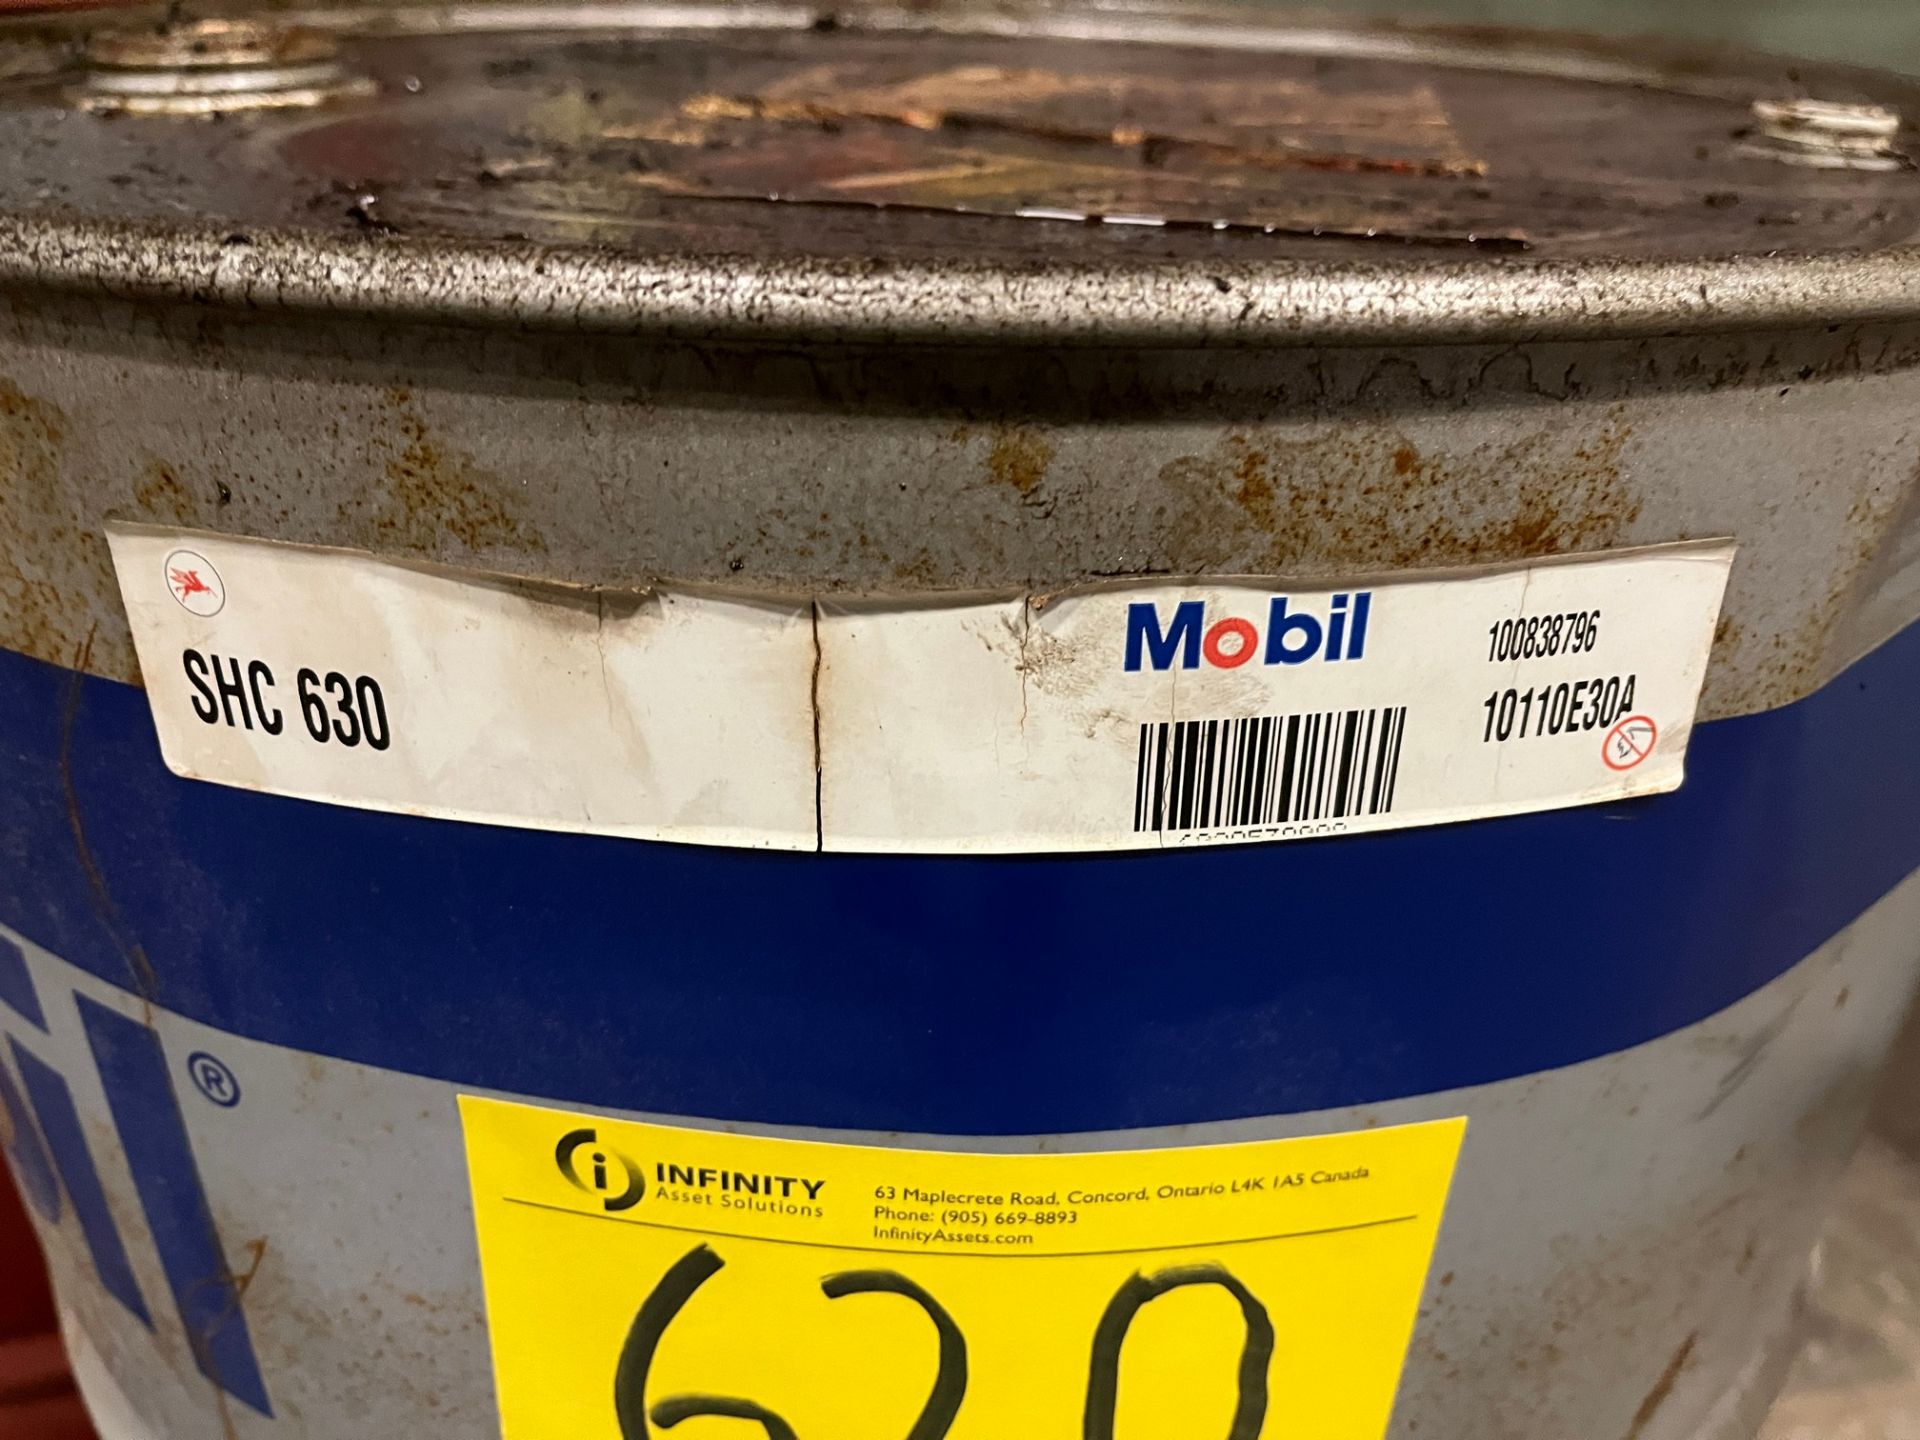 LOT OF (2) BARRELS OF MOBIL SHC630 SYNTHETIC LUBRICANT (PM MAIN WAREHOUSE) - Image 2 of 2